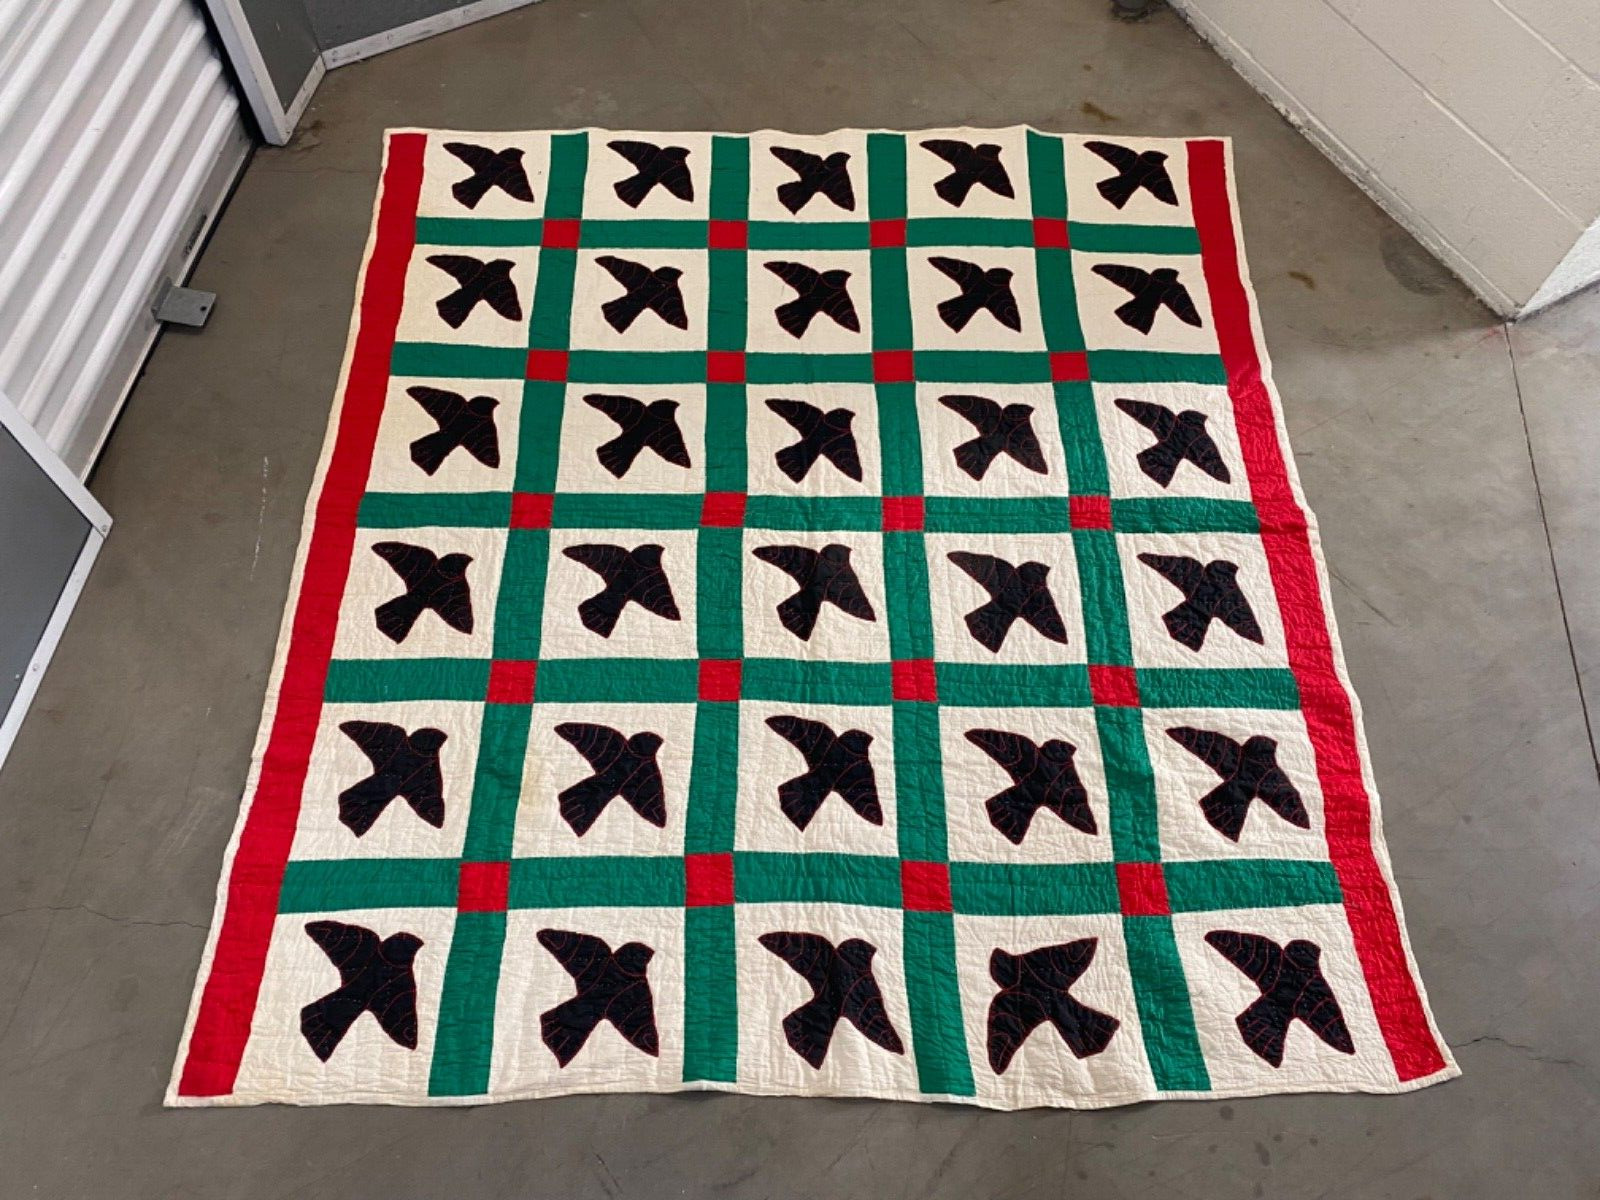 🔥 RARE Antique Old Southern Folk Art Crow Bird Quilt, Hand Stitched 1920s